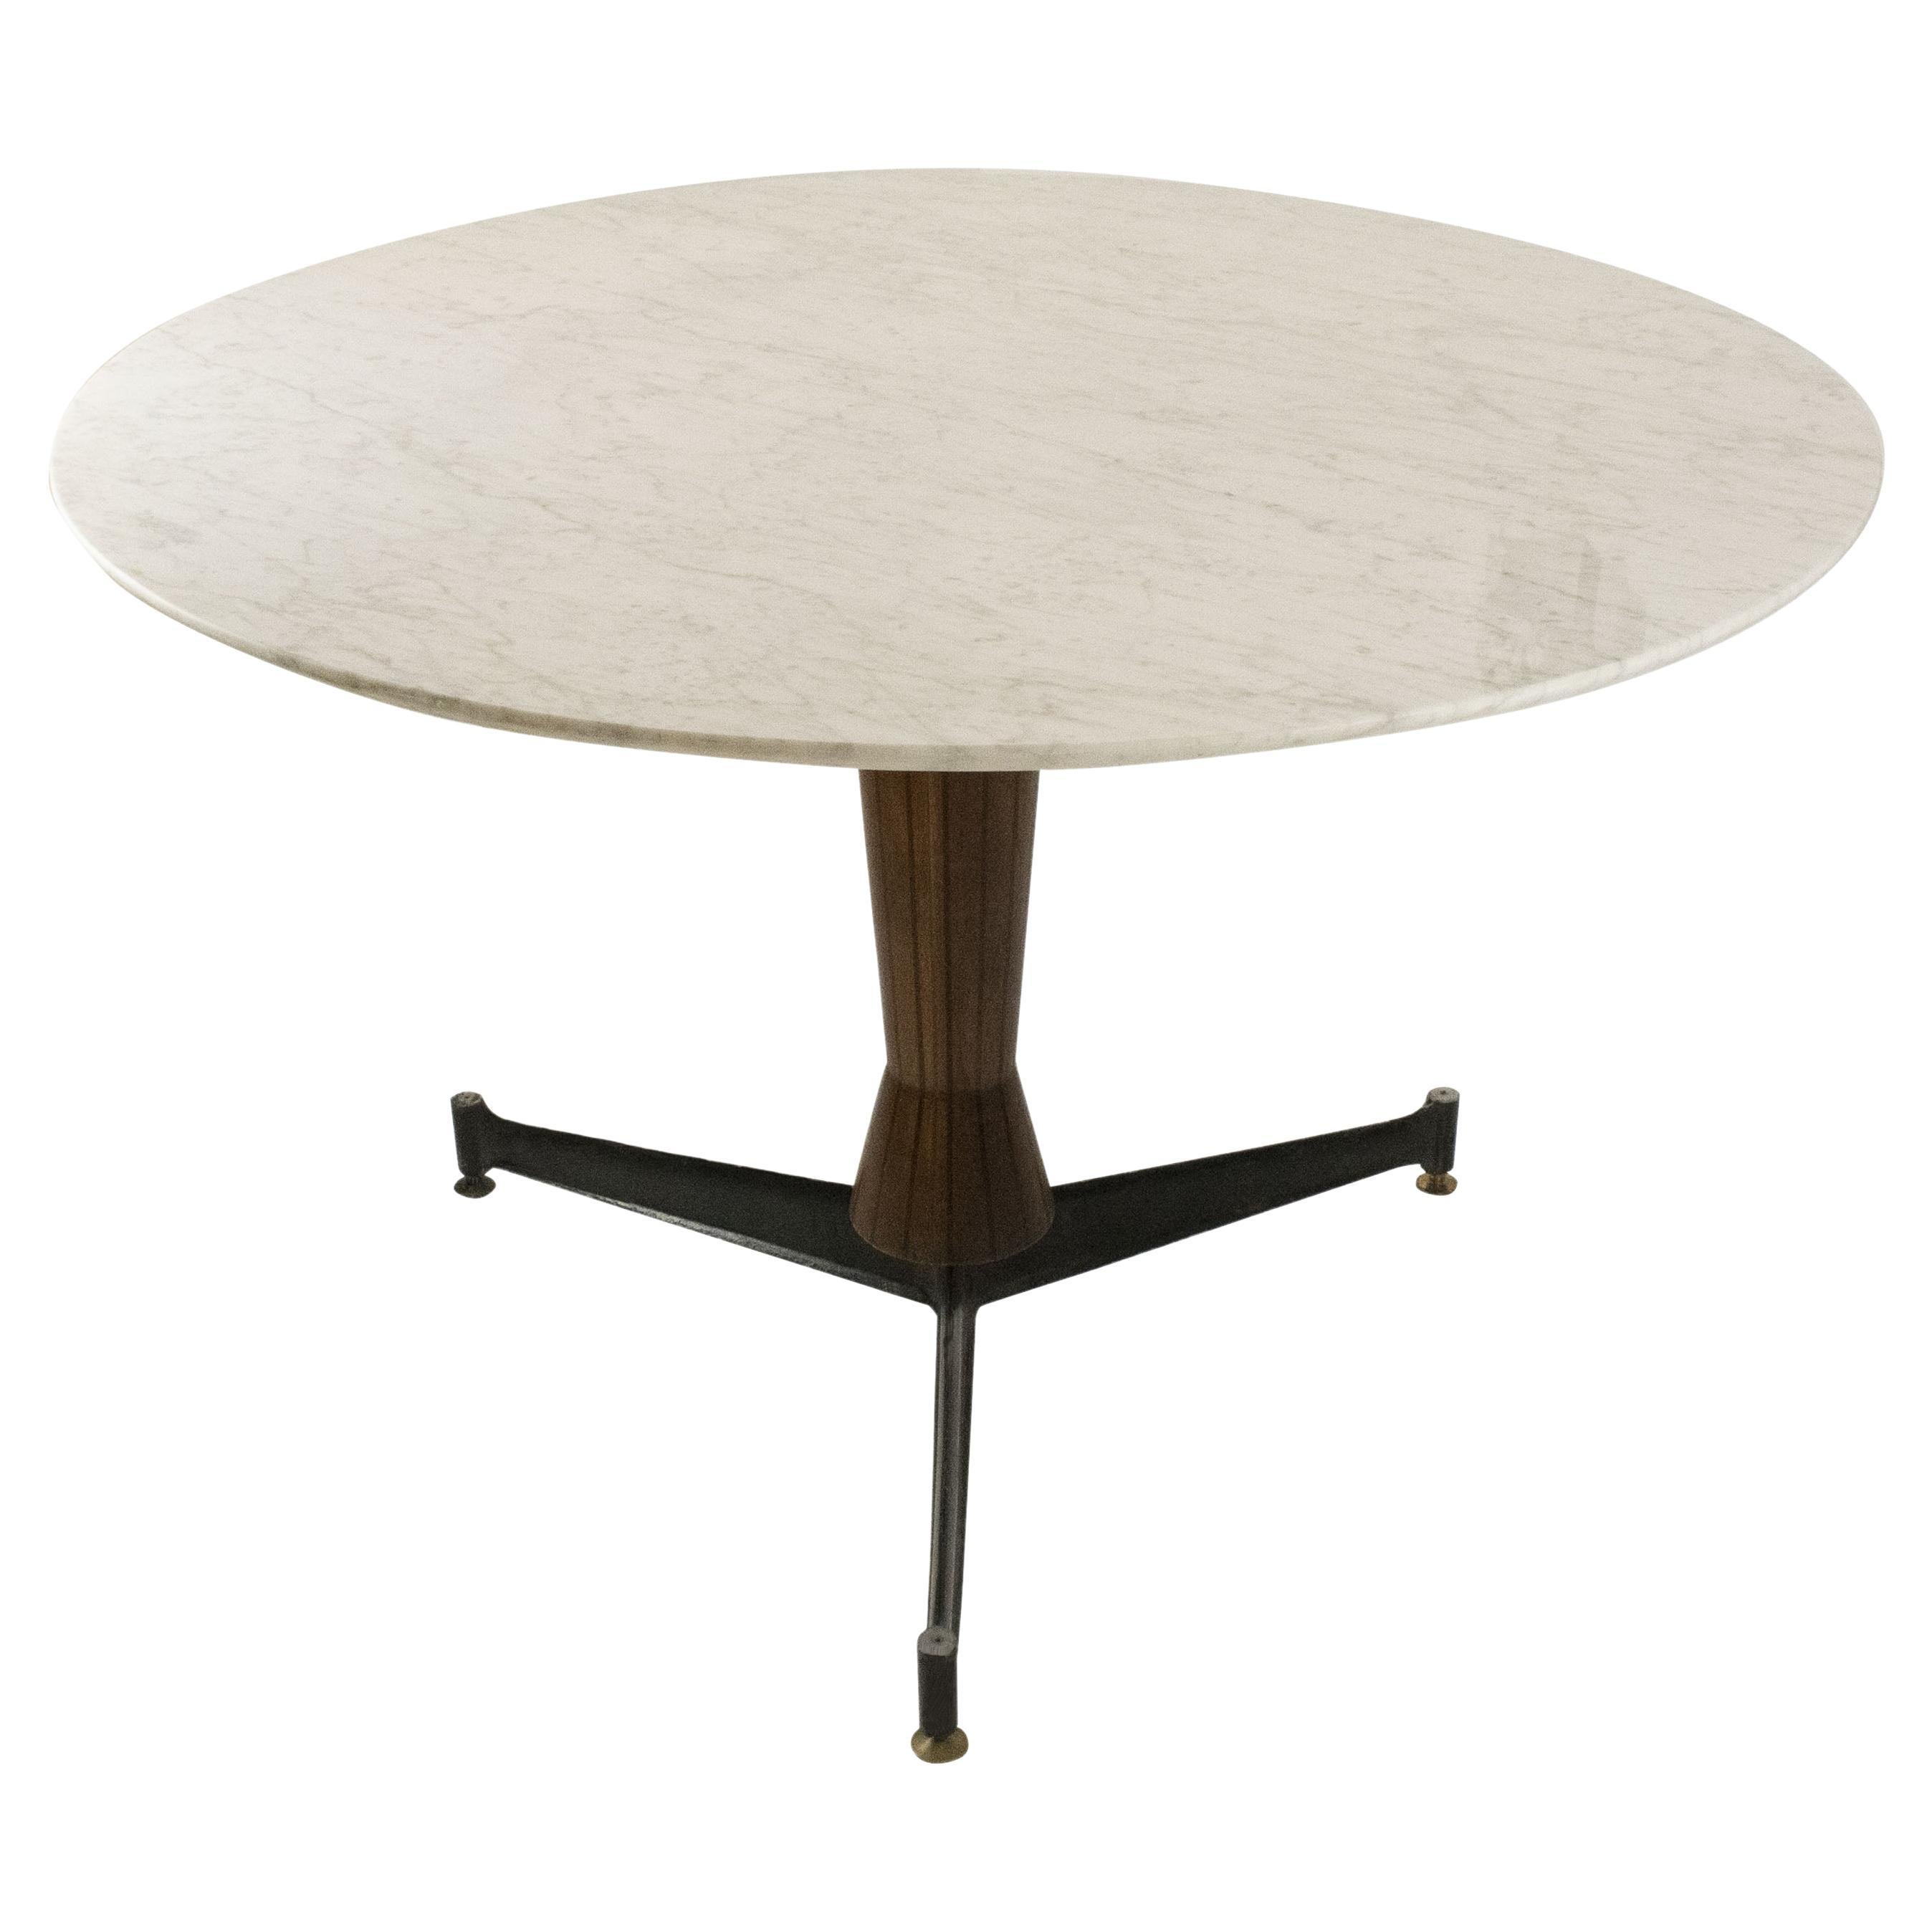 Mid-century round dining table with white Carrara marble top and teak wood foot decorated with black stripes and black lacquered metal supports finished in height-adjustable brass pads.
Measurements: 
Base width: 13 cm diameter
Base height: 74 cm.